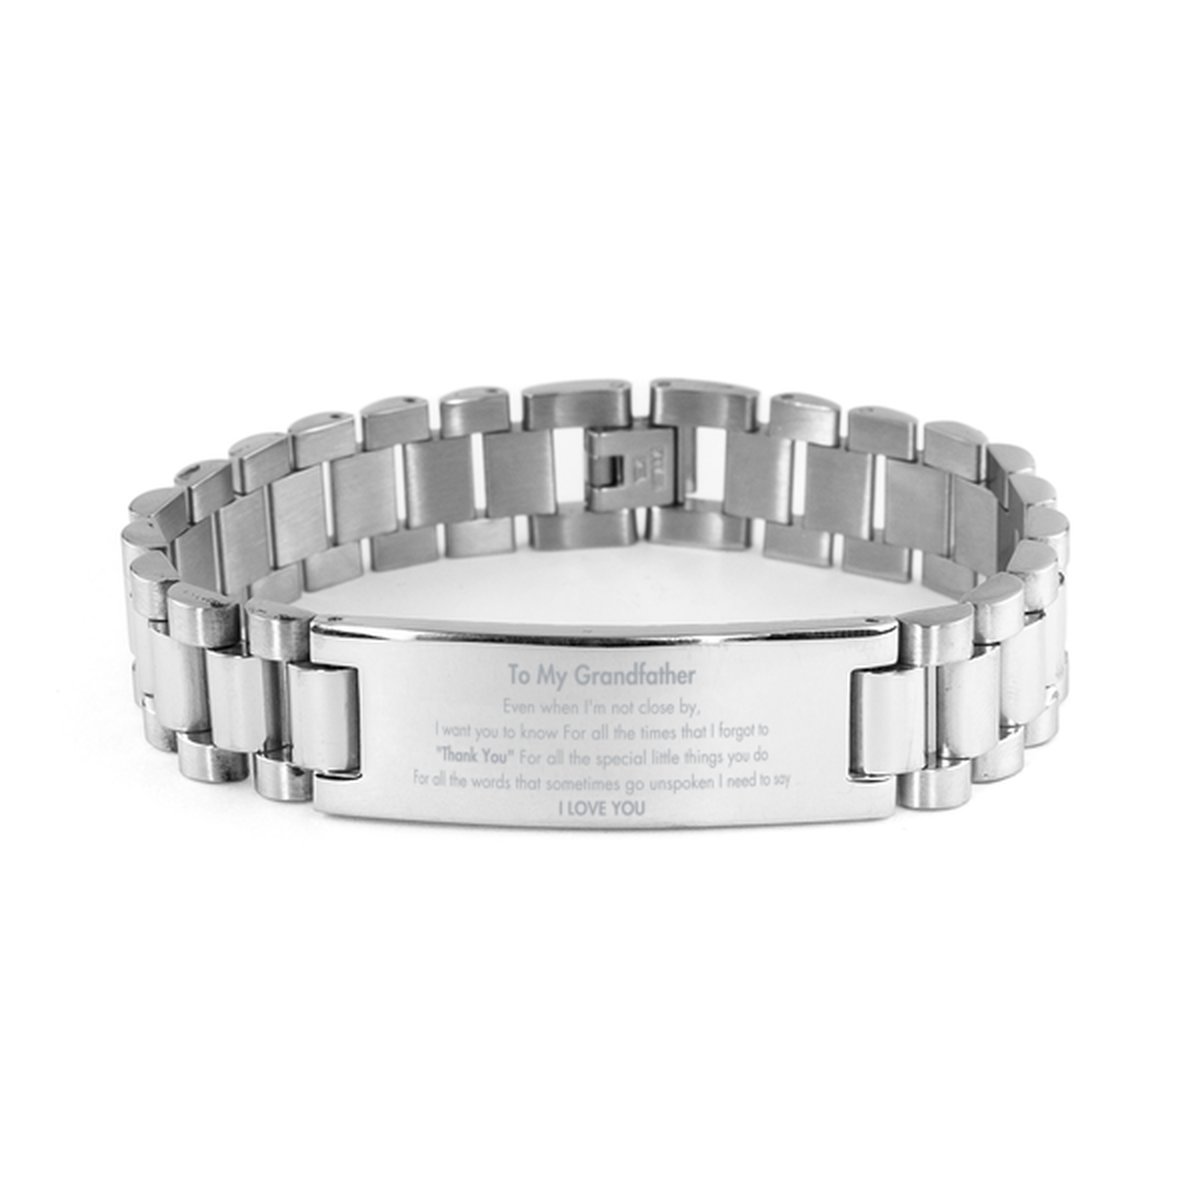 Thank You Gifts for Grandfather, Keepsake Ladder Stainless Steel Bracelet Gifts for Grandfather Birthday Mother's day Father's Day Grandfather For all the words That sometimes go unspoken I need to say I LOVE YOU